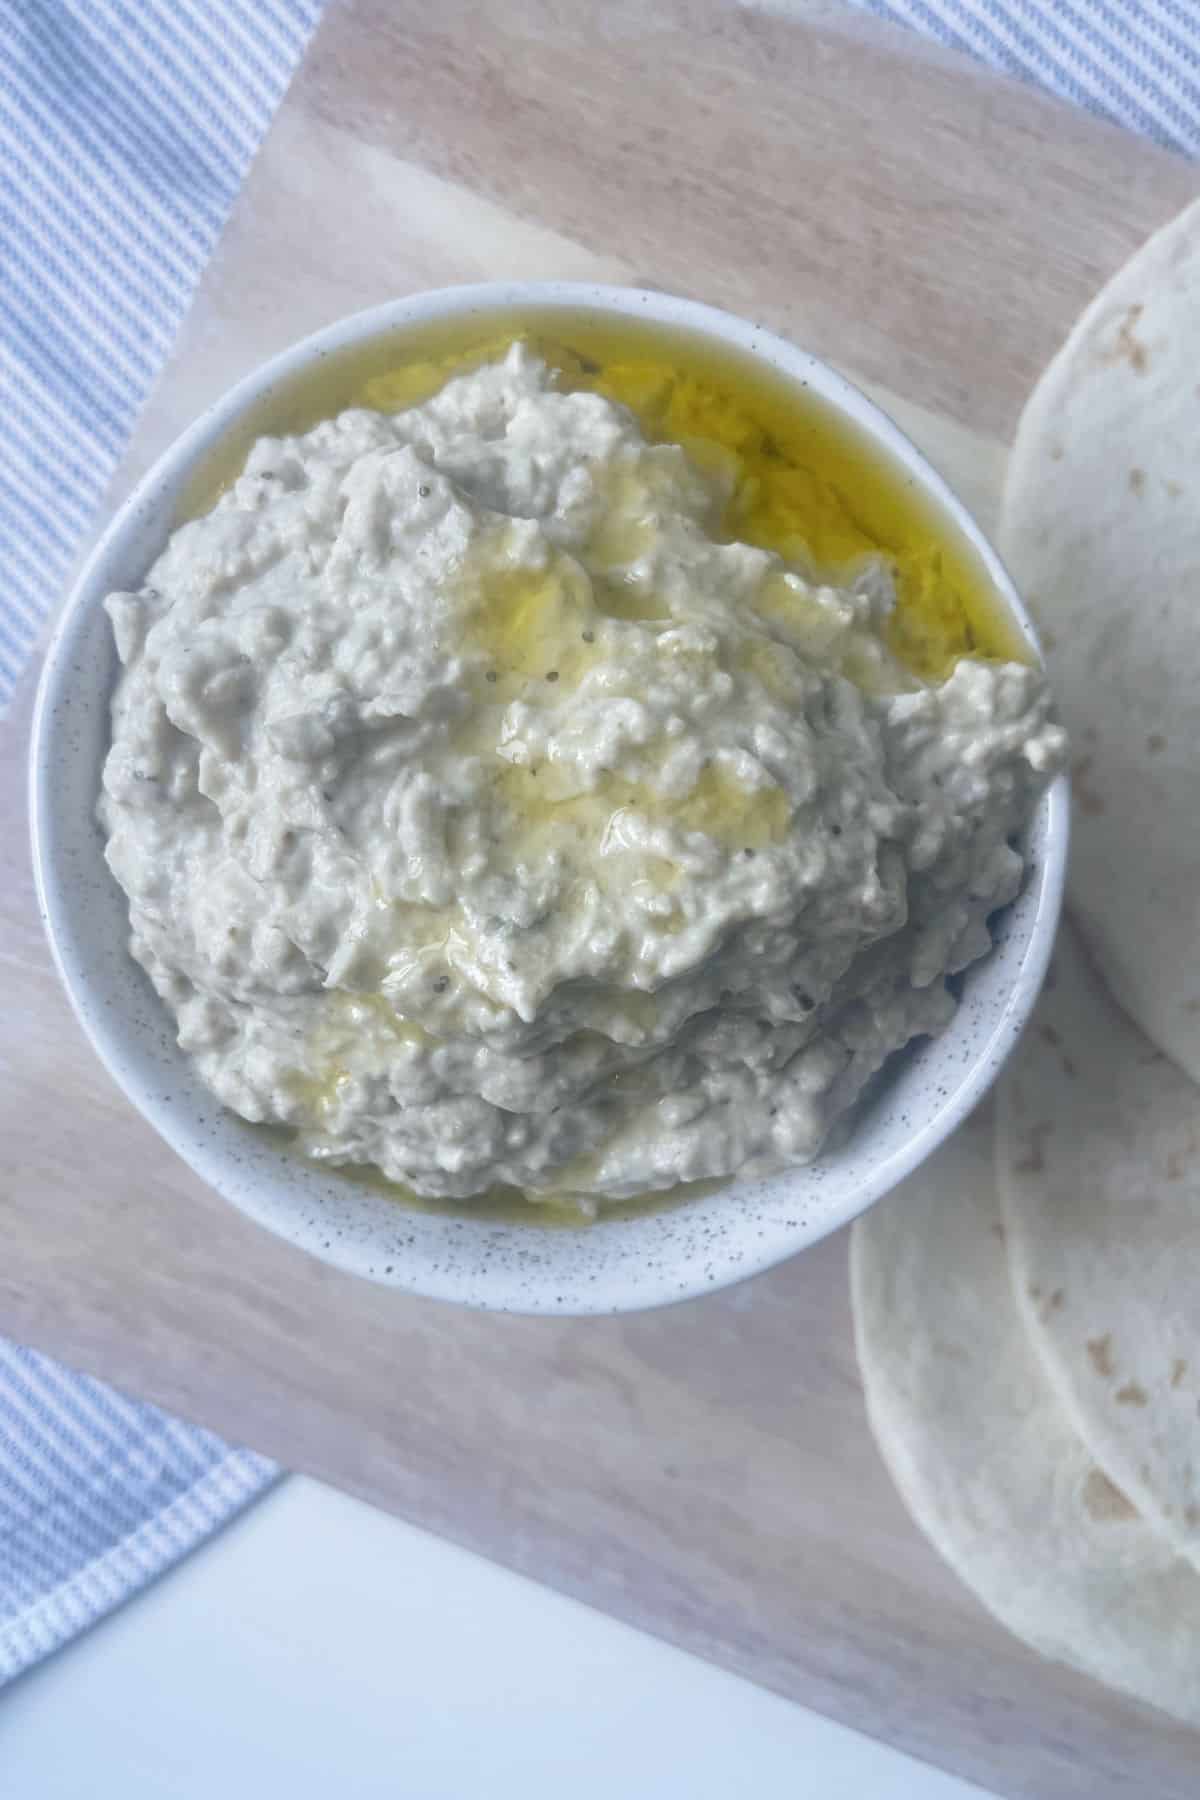 Baba Ghanoush drizzled with olive oil in a white speckled bowl sitting on chopping board.